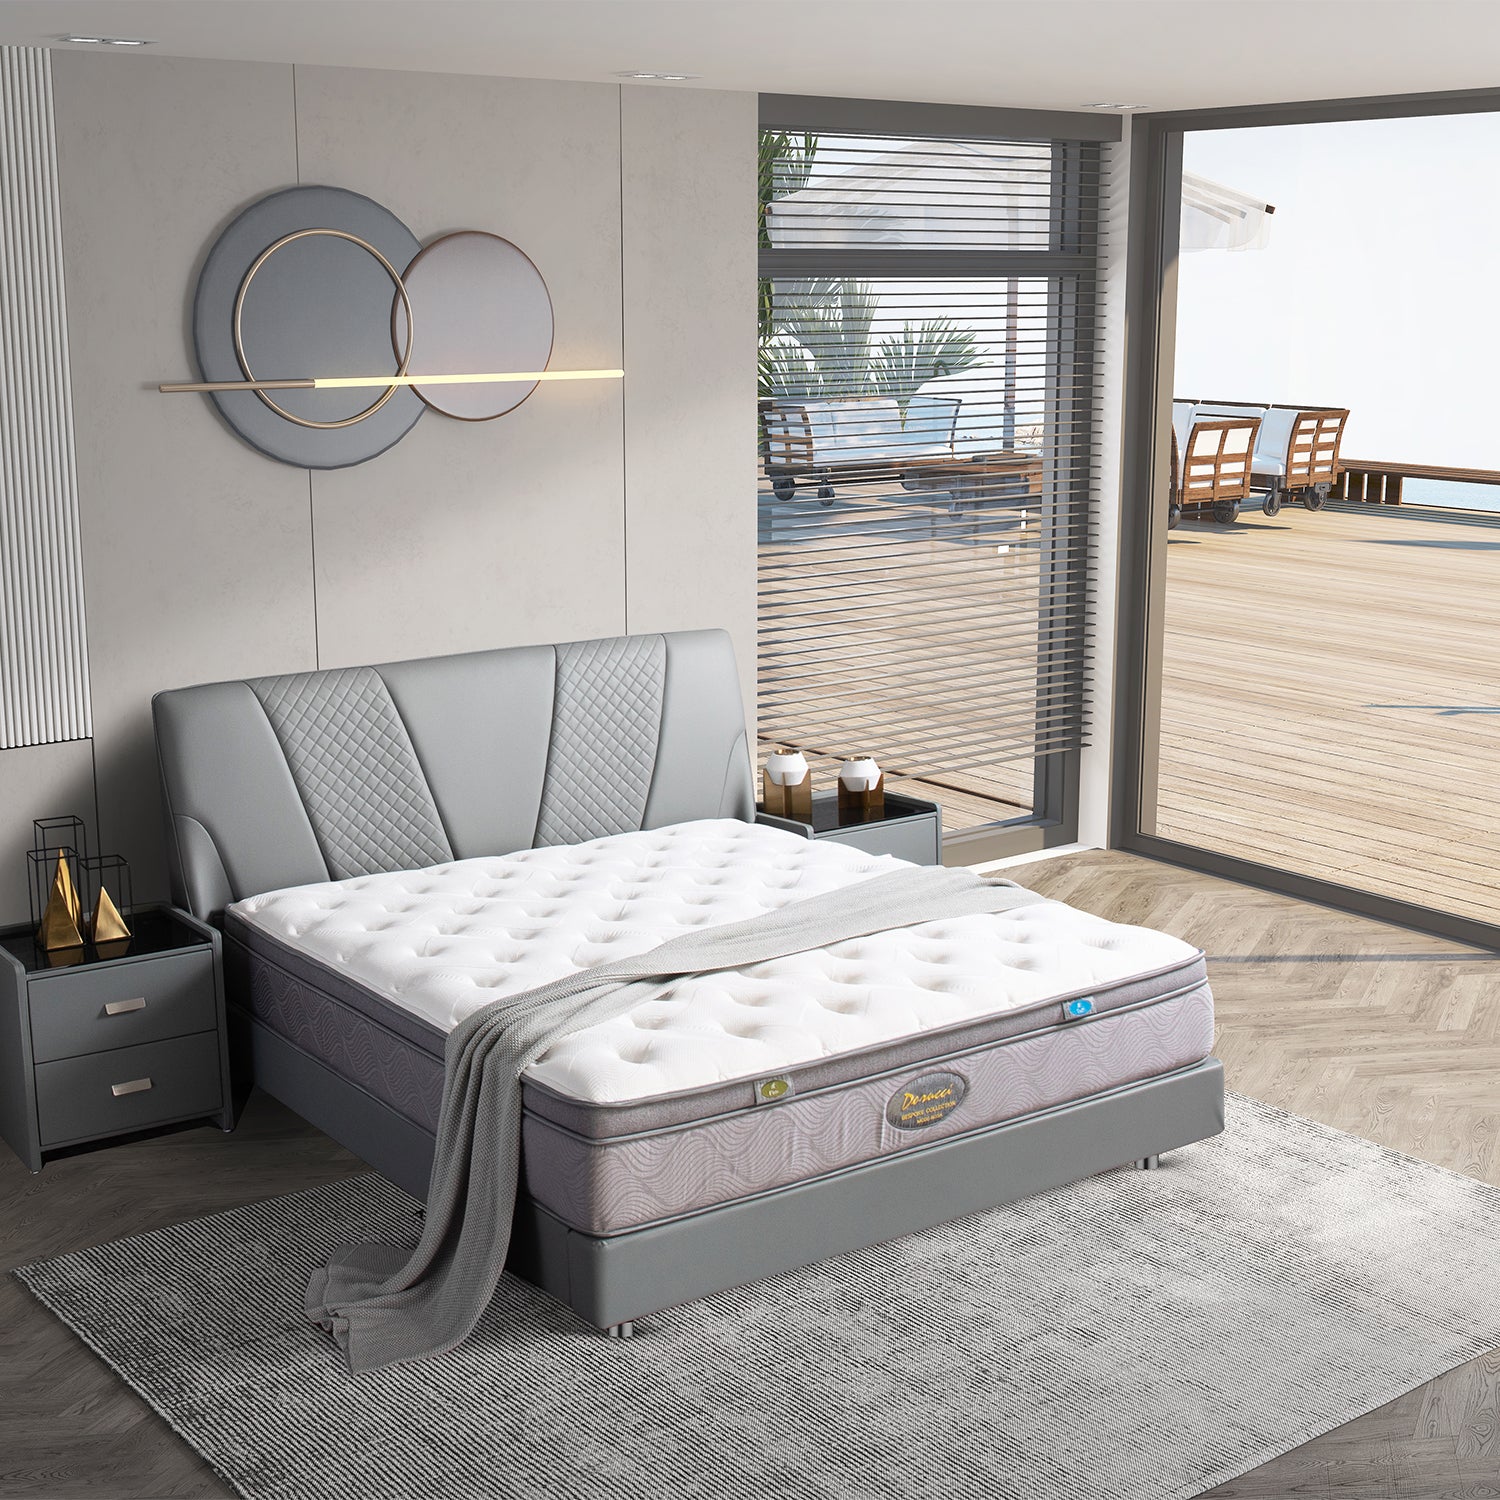 DeRUCCI Bed Frame BOC1 - 005 with grey upholstered headboard and white quilted mattress in a modern bedroom with ocean view.